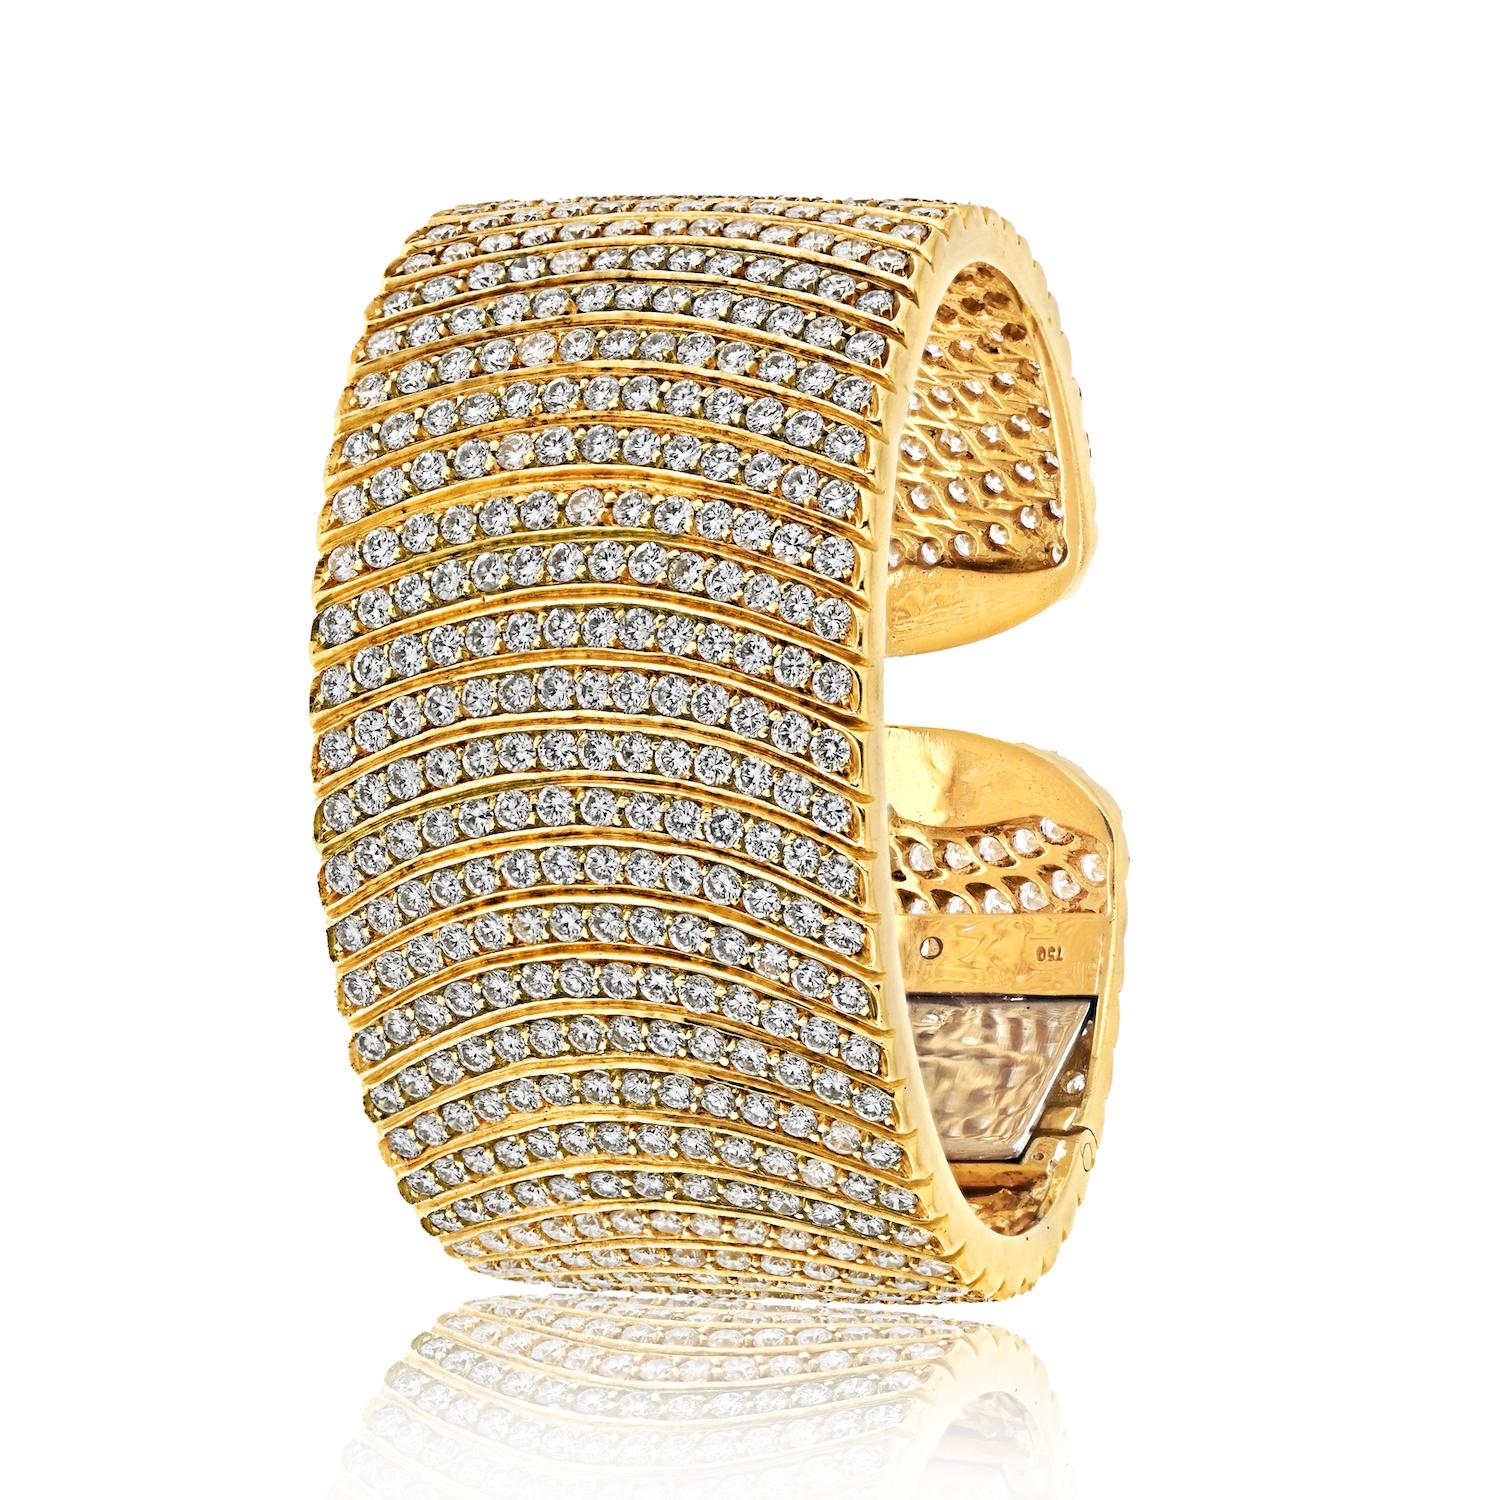 Indulge in the splendor of this exquisite diamond cuff bracelet, meticulously crafted in 18k yellow gold and adorned with an opulent array of round brilliant cut diamonds totaling an impressive 32 carats. As you unveil this breathtaking piece,